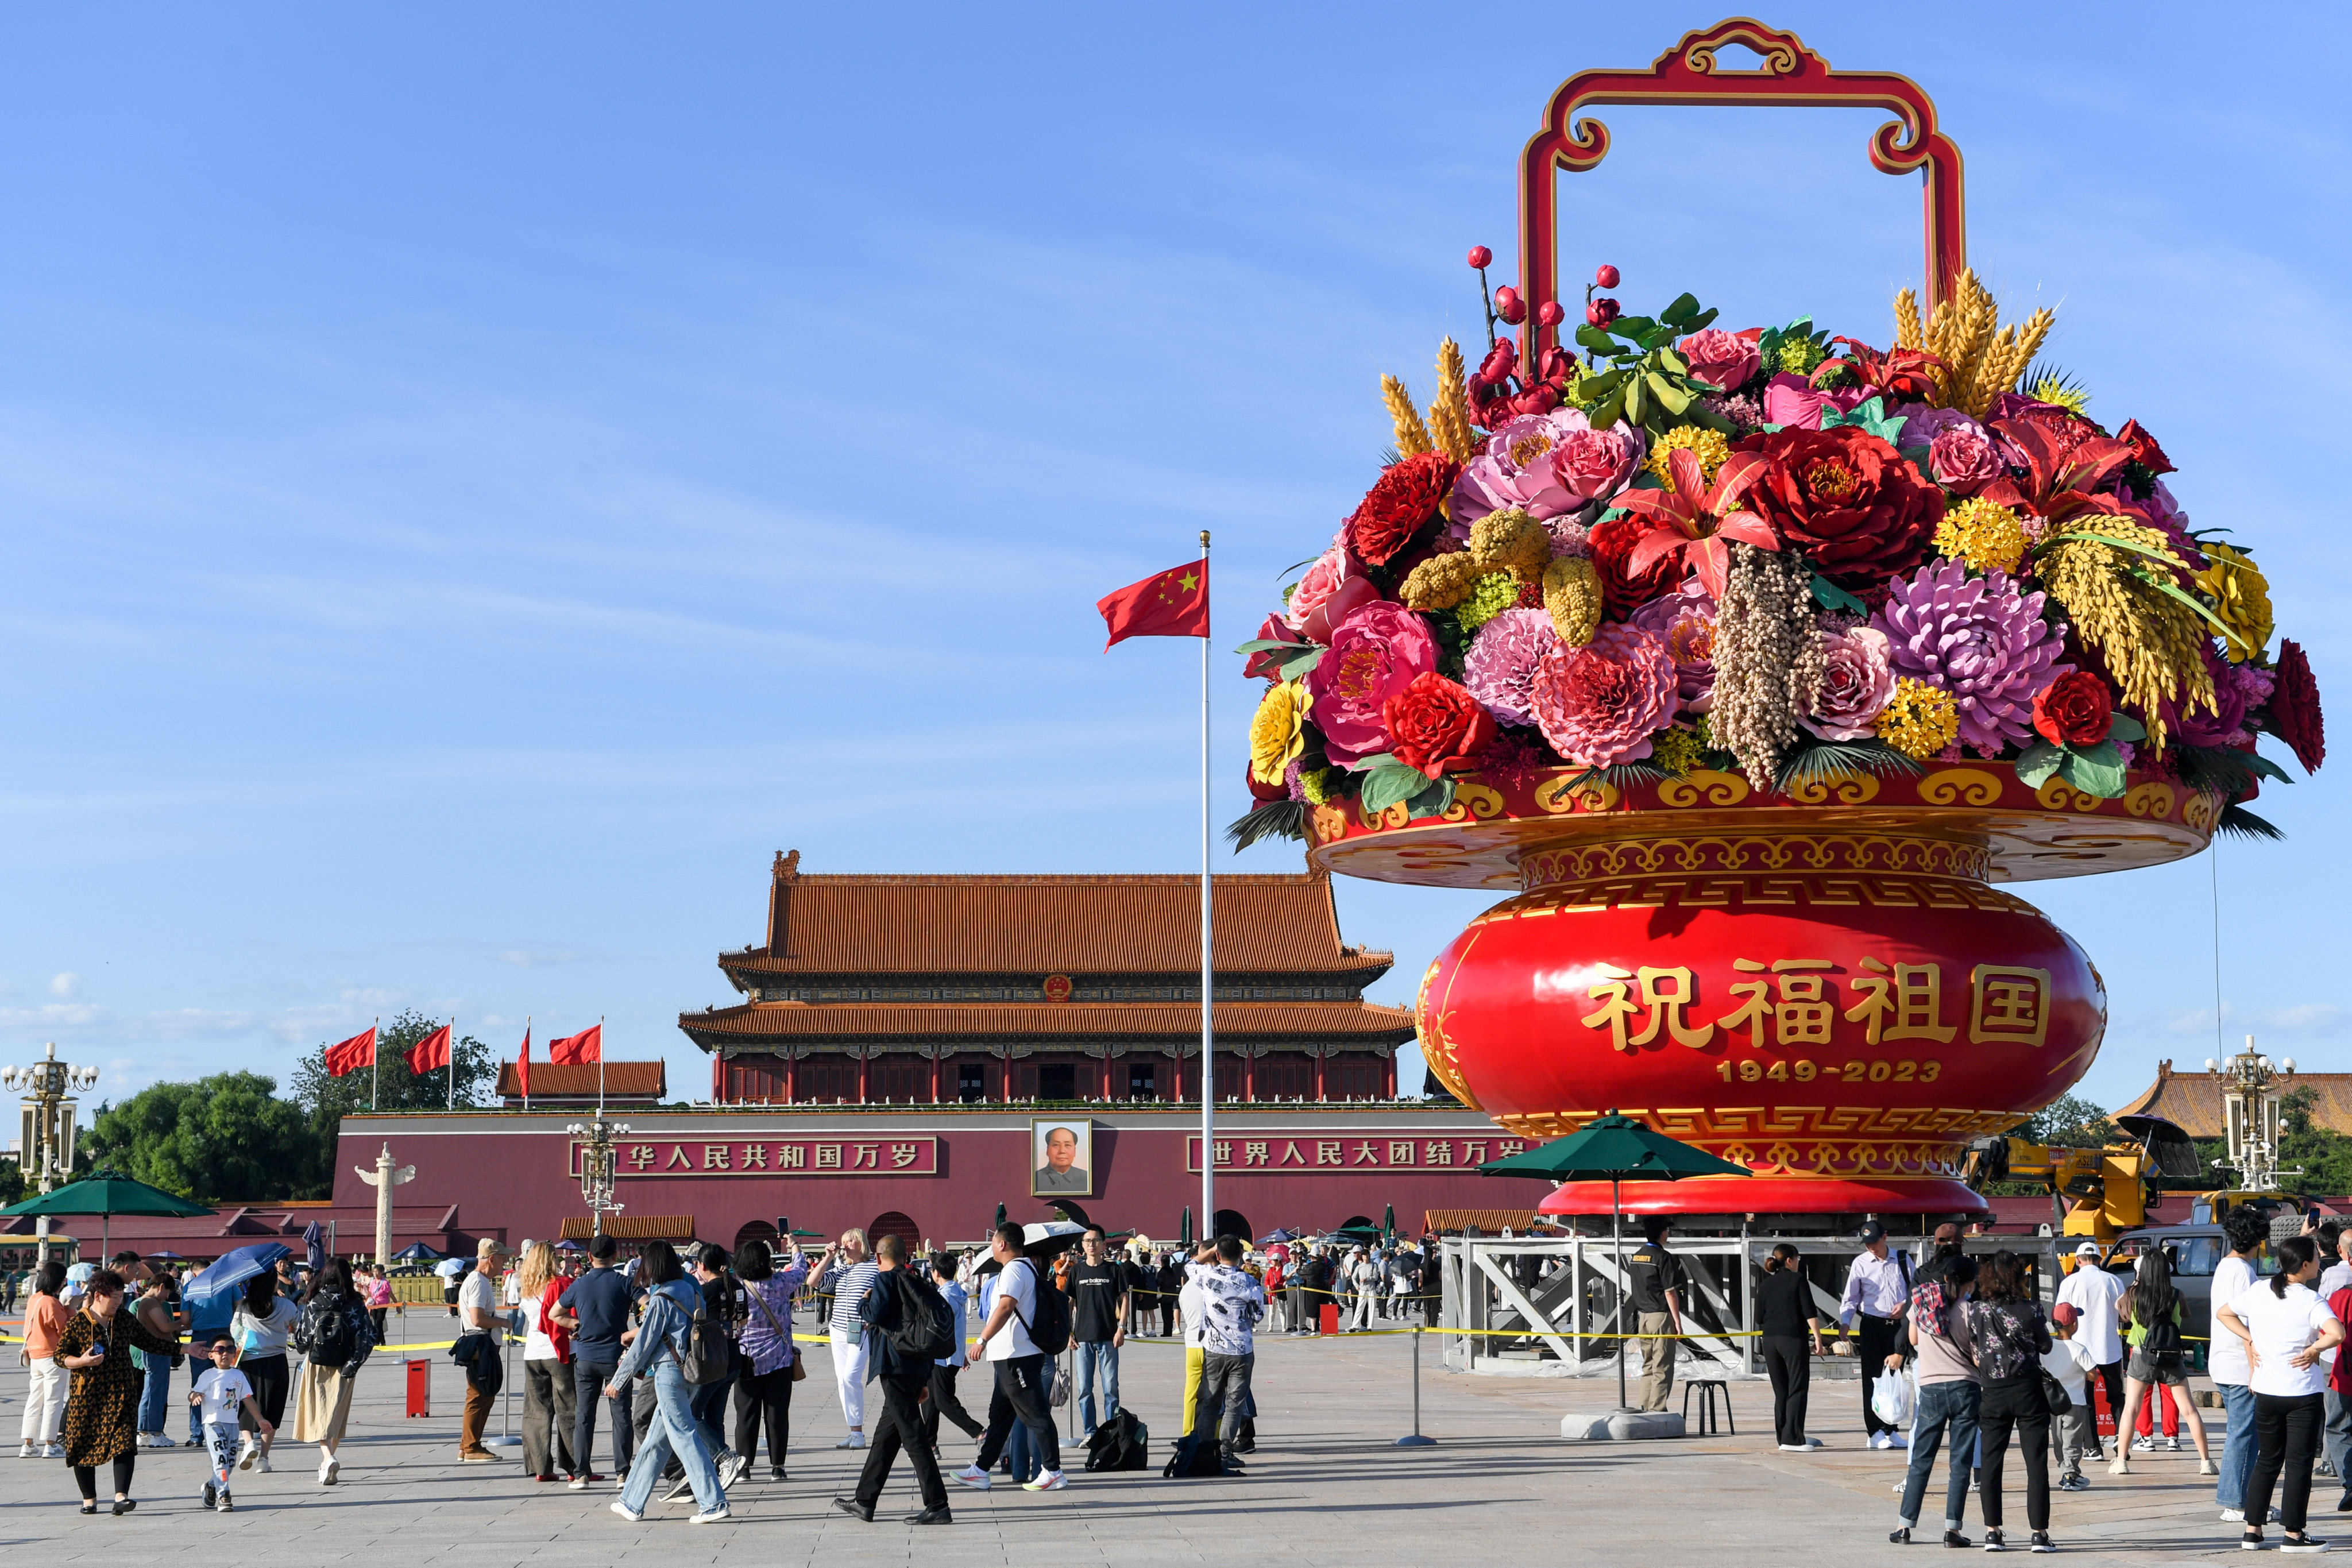 Travellers from across China will visit Beijing during the ‘golden week’ holiday that begins on Friday, and a giant flower pot in Tiananmen Square is expected to be a big attraction. Photo: Xinhua